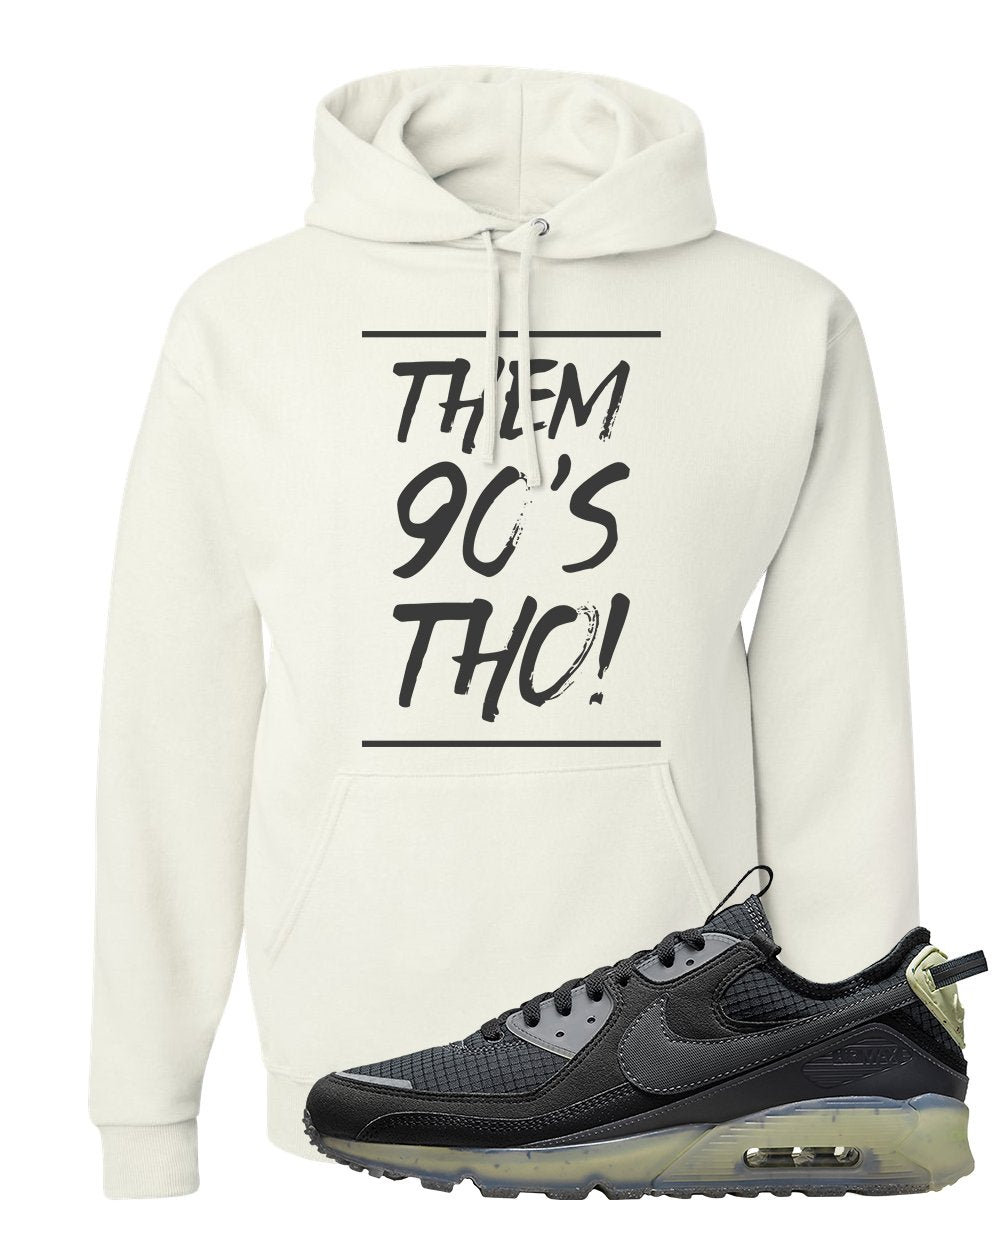 Terrascape Lime Ice 90s Hoodie | Them 90's Tho, White